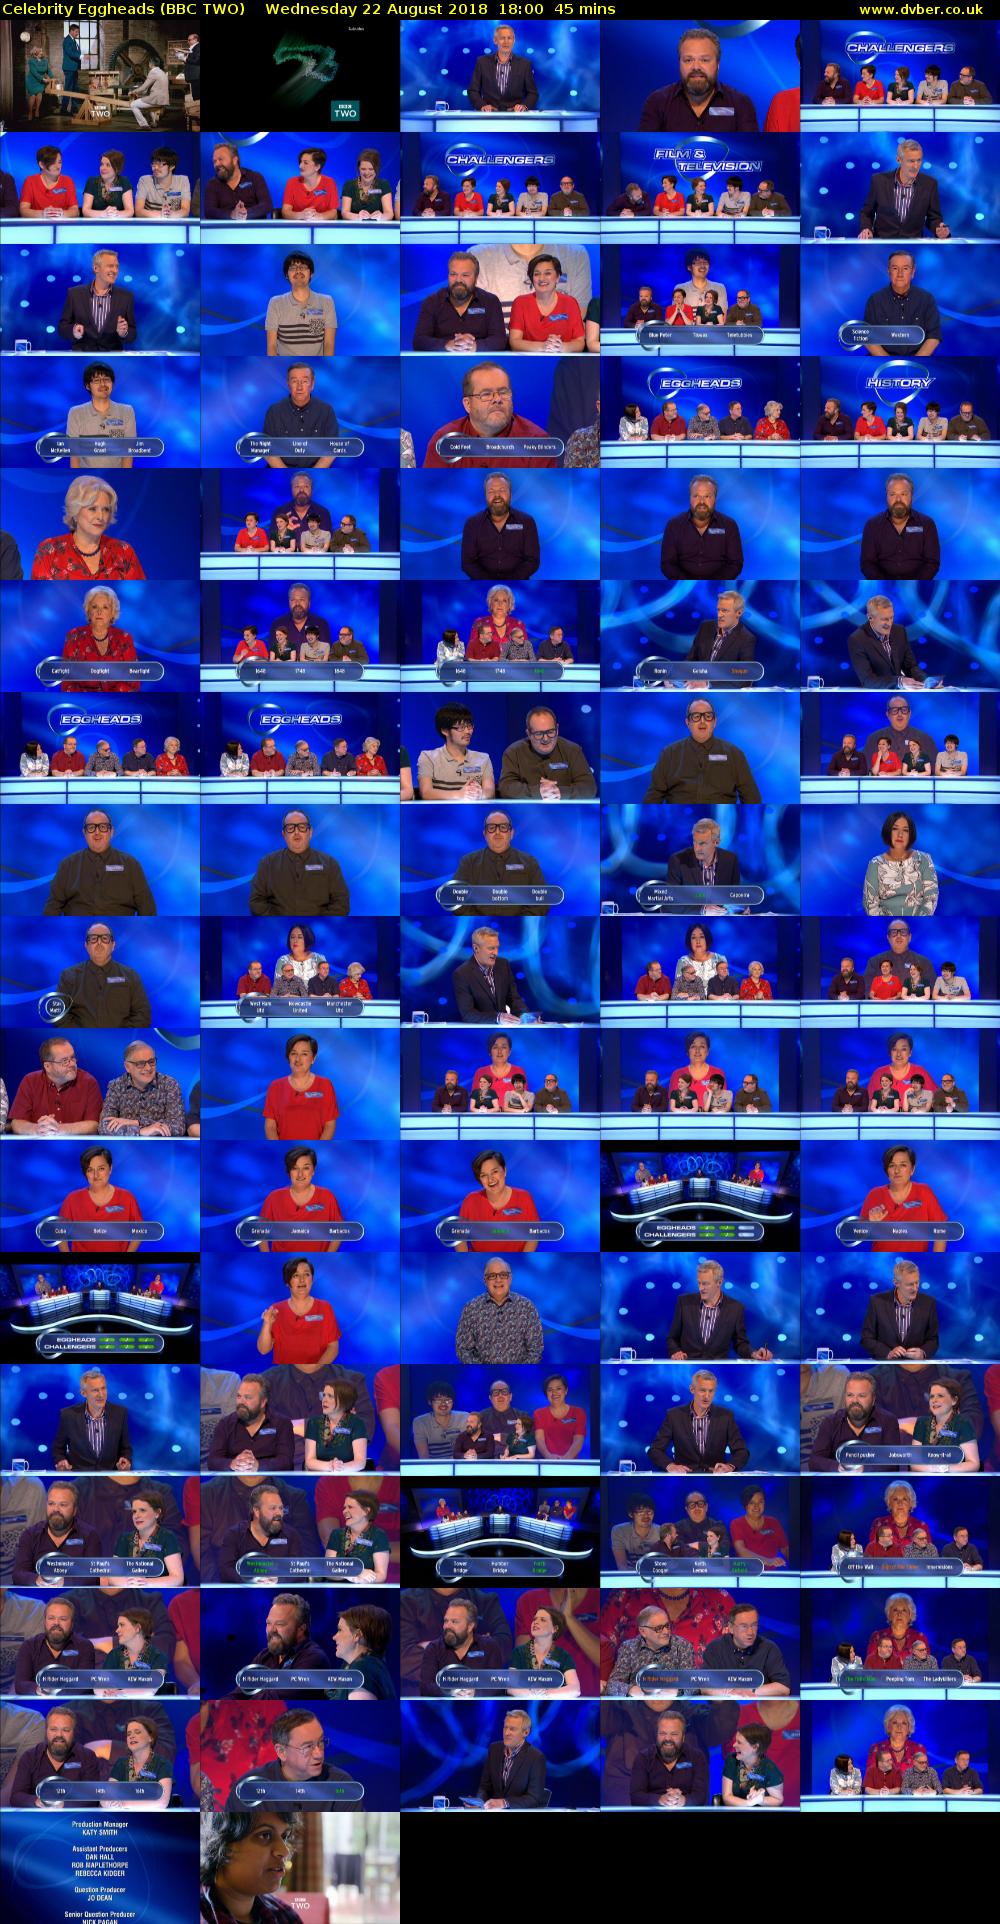 Celebrity Eggheads (BBC TWO) Wednesday 22 August 2018 18:00 - 18:45